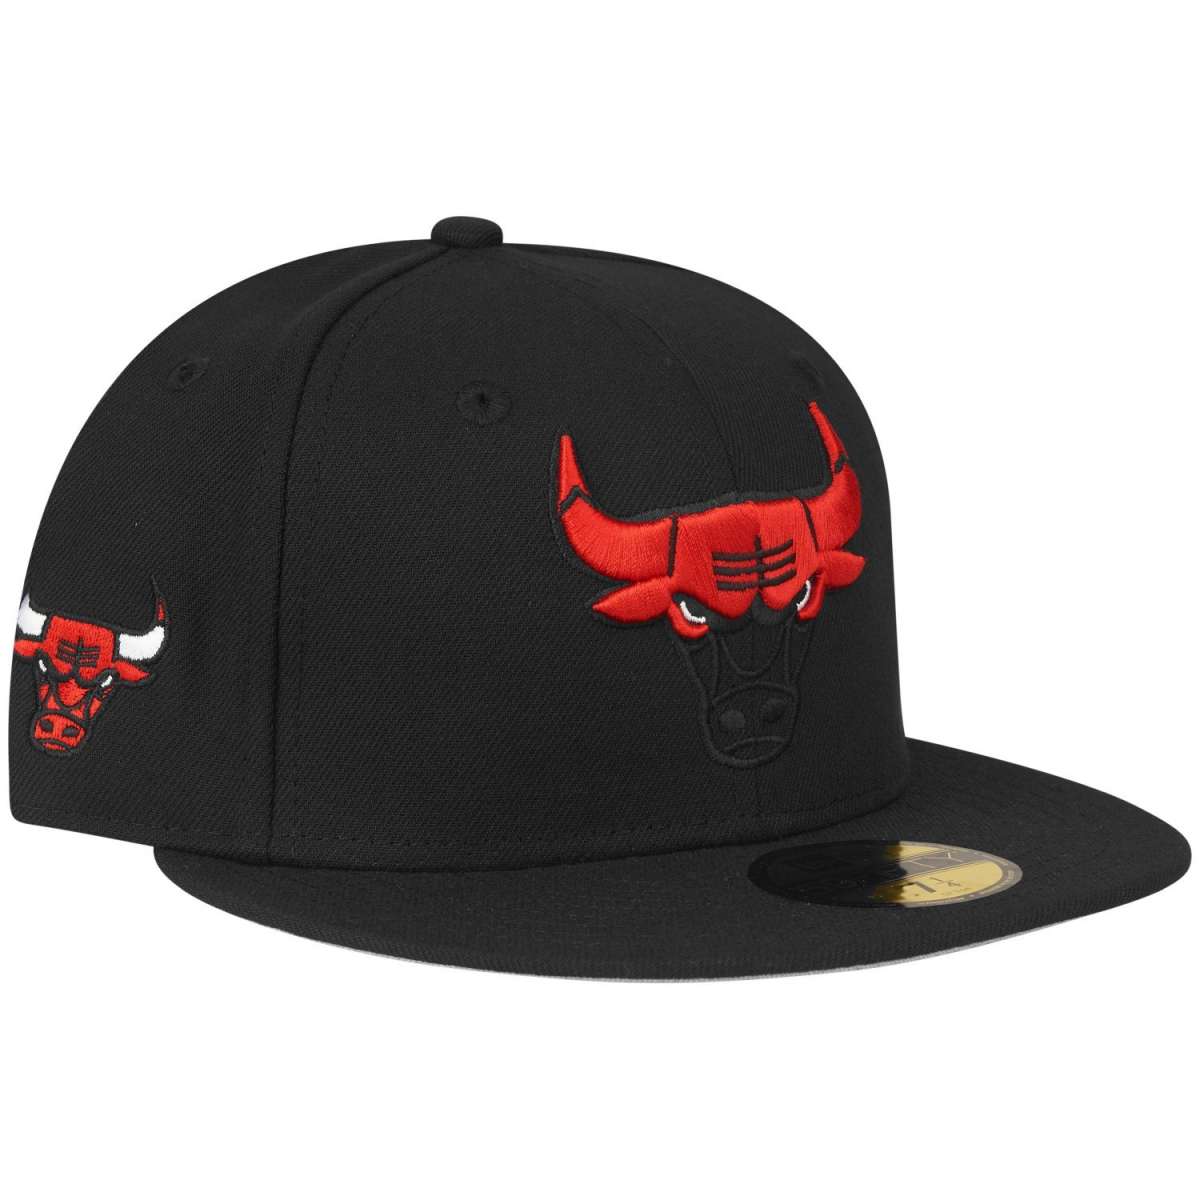 New Era 59Fifty Fitted Cap ELEMENTS Chicago Bulls Fitted Caps